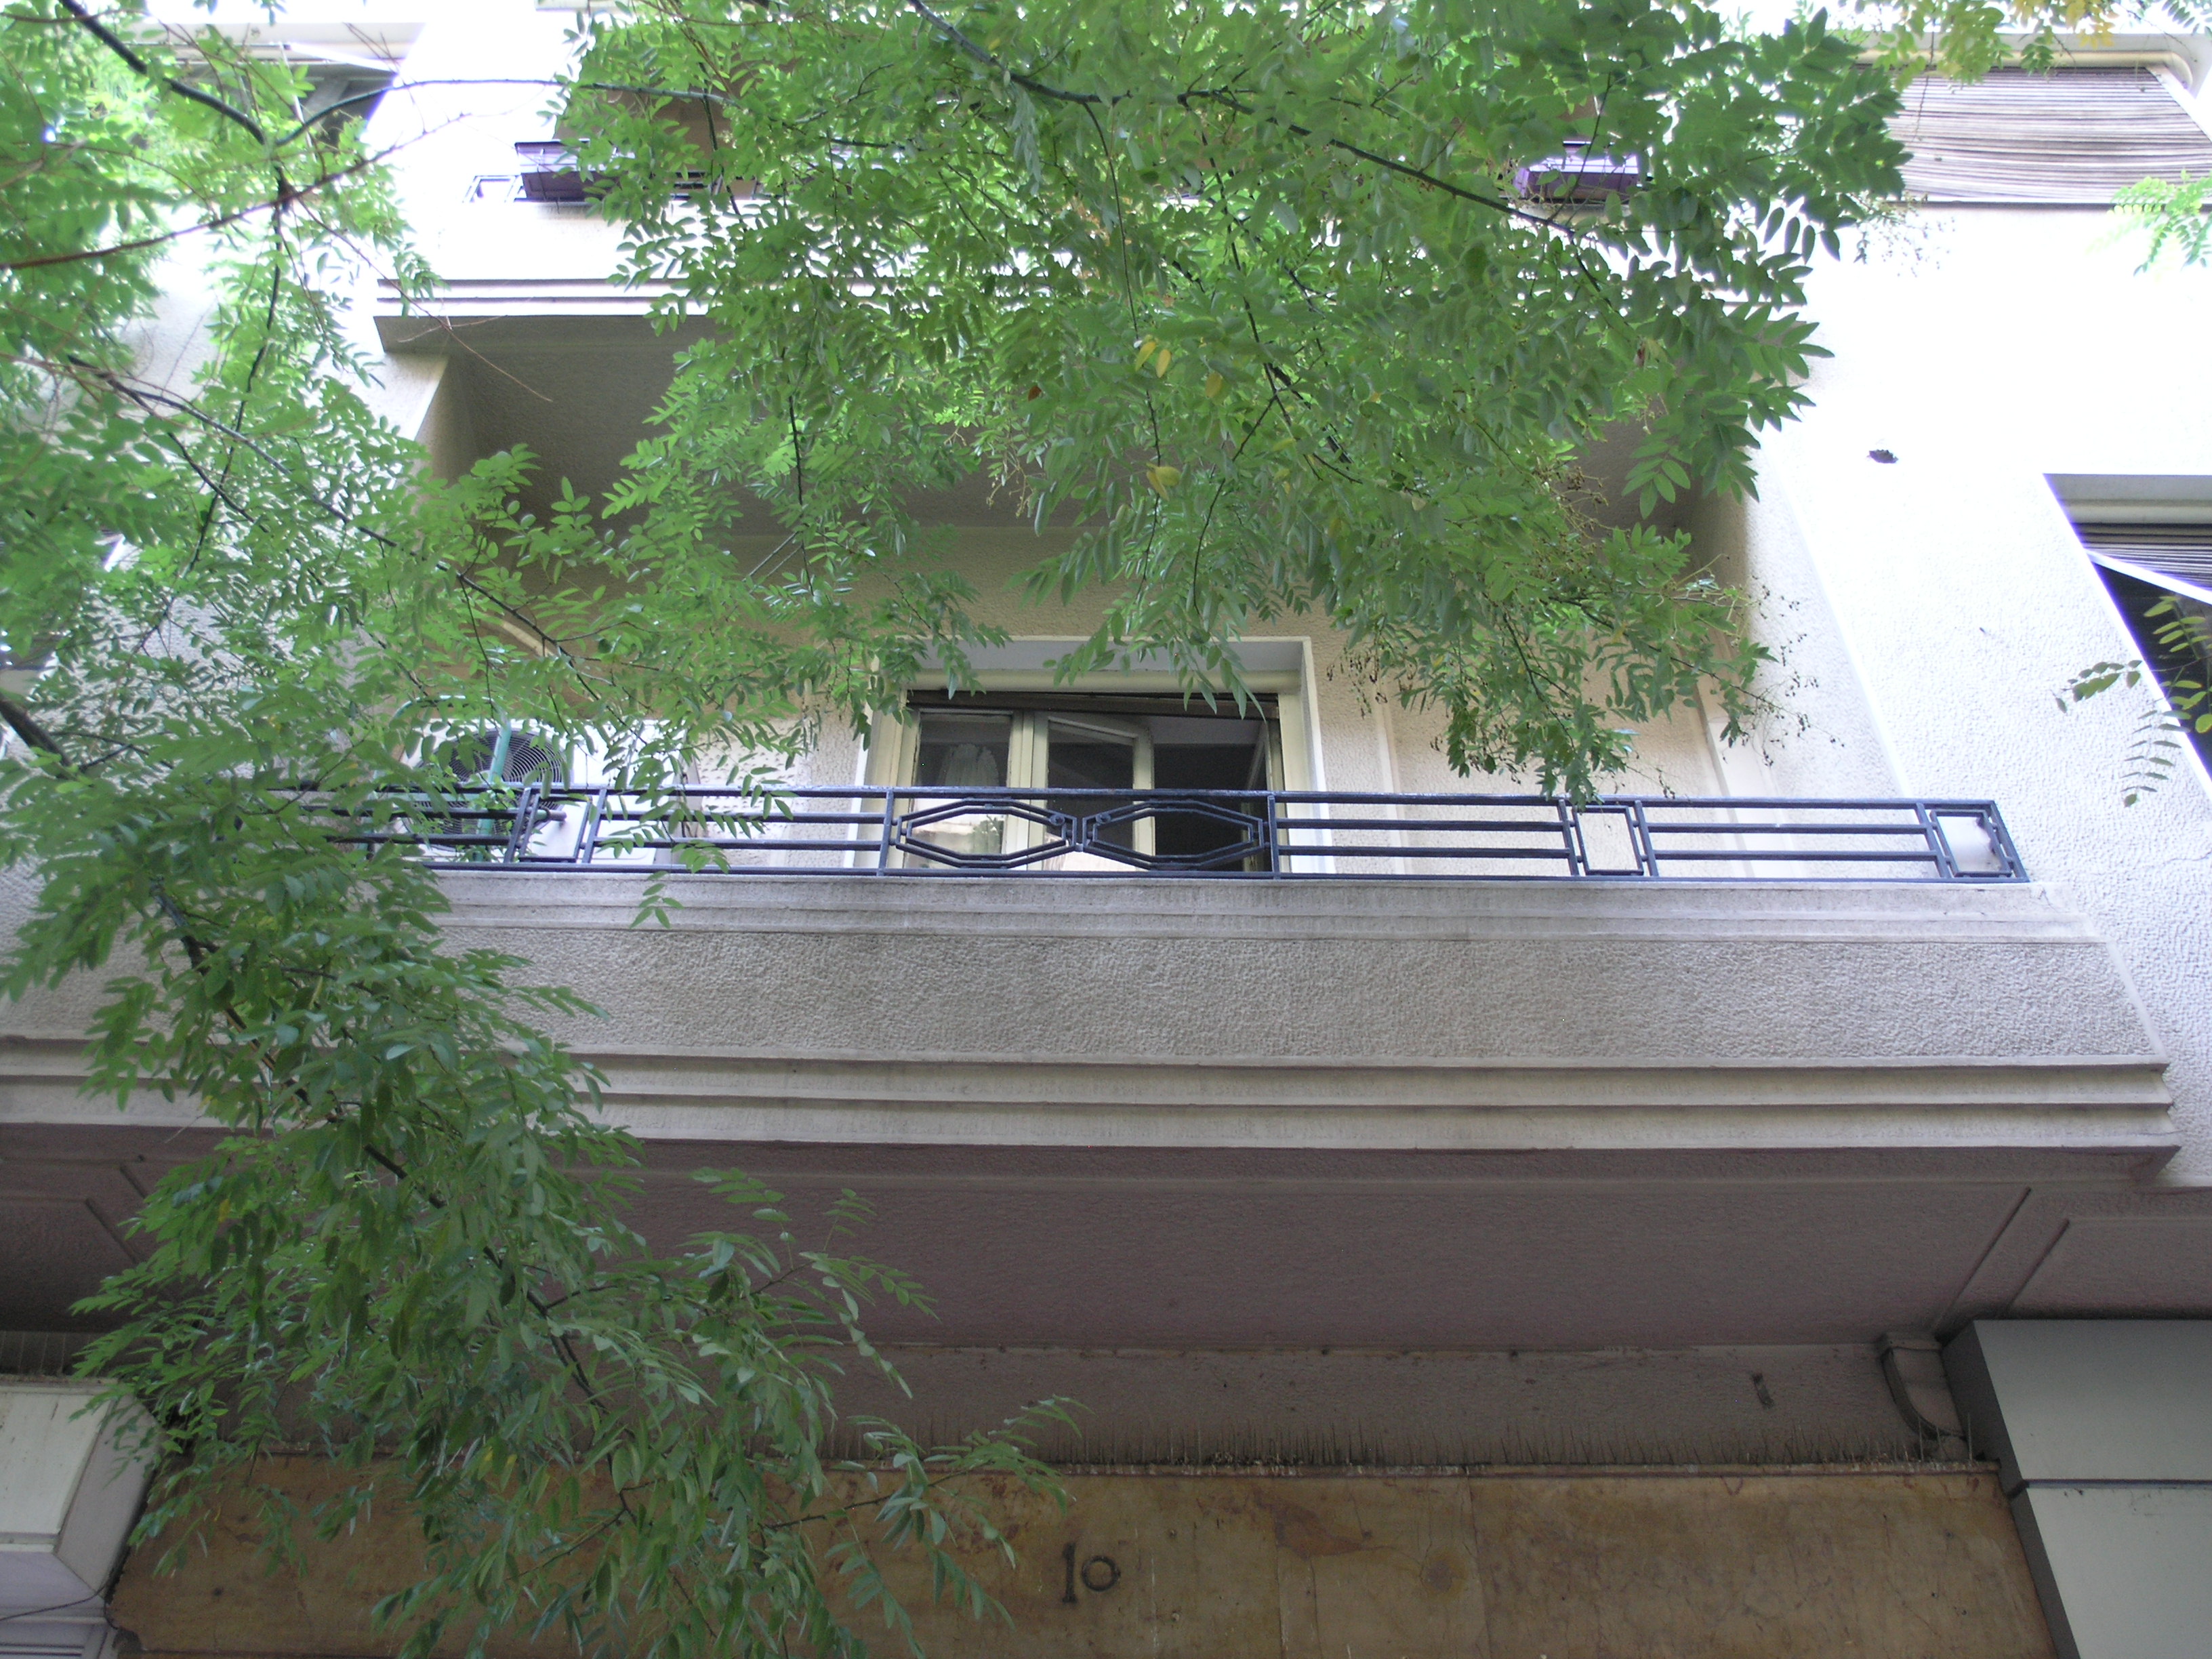 Detail of the balcony (2016)